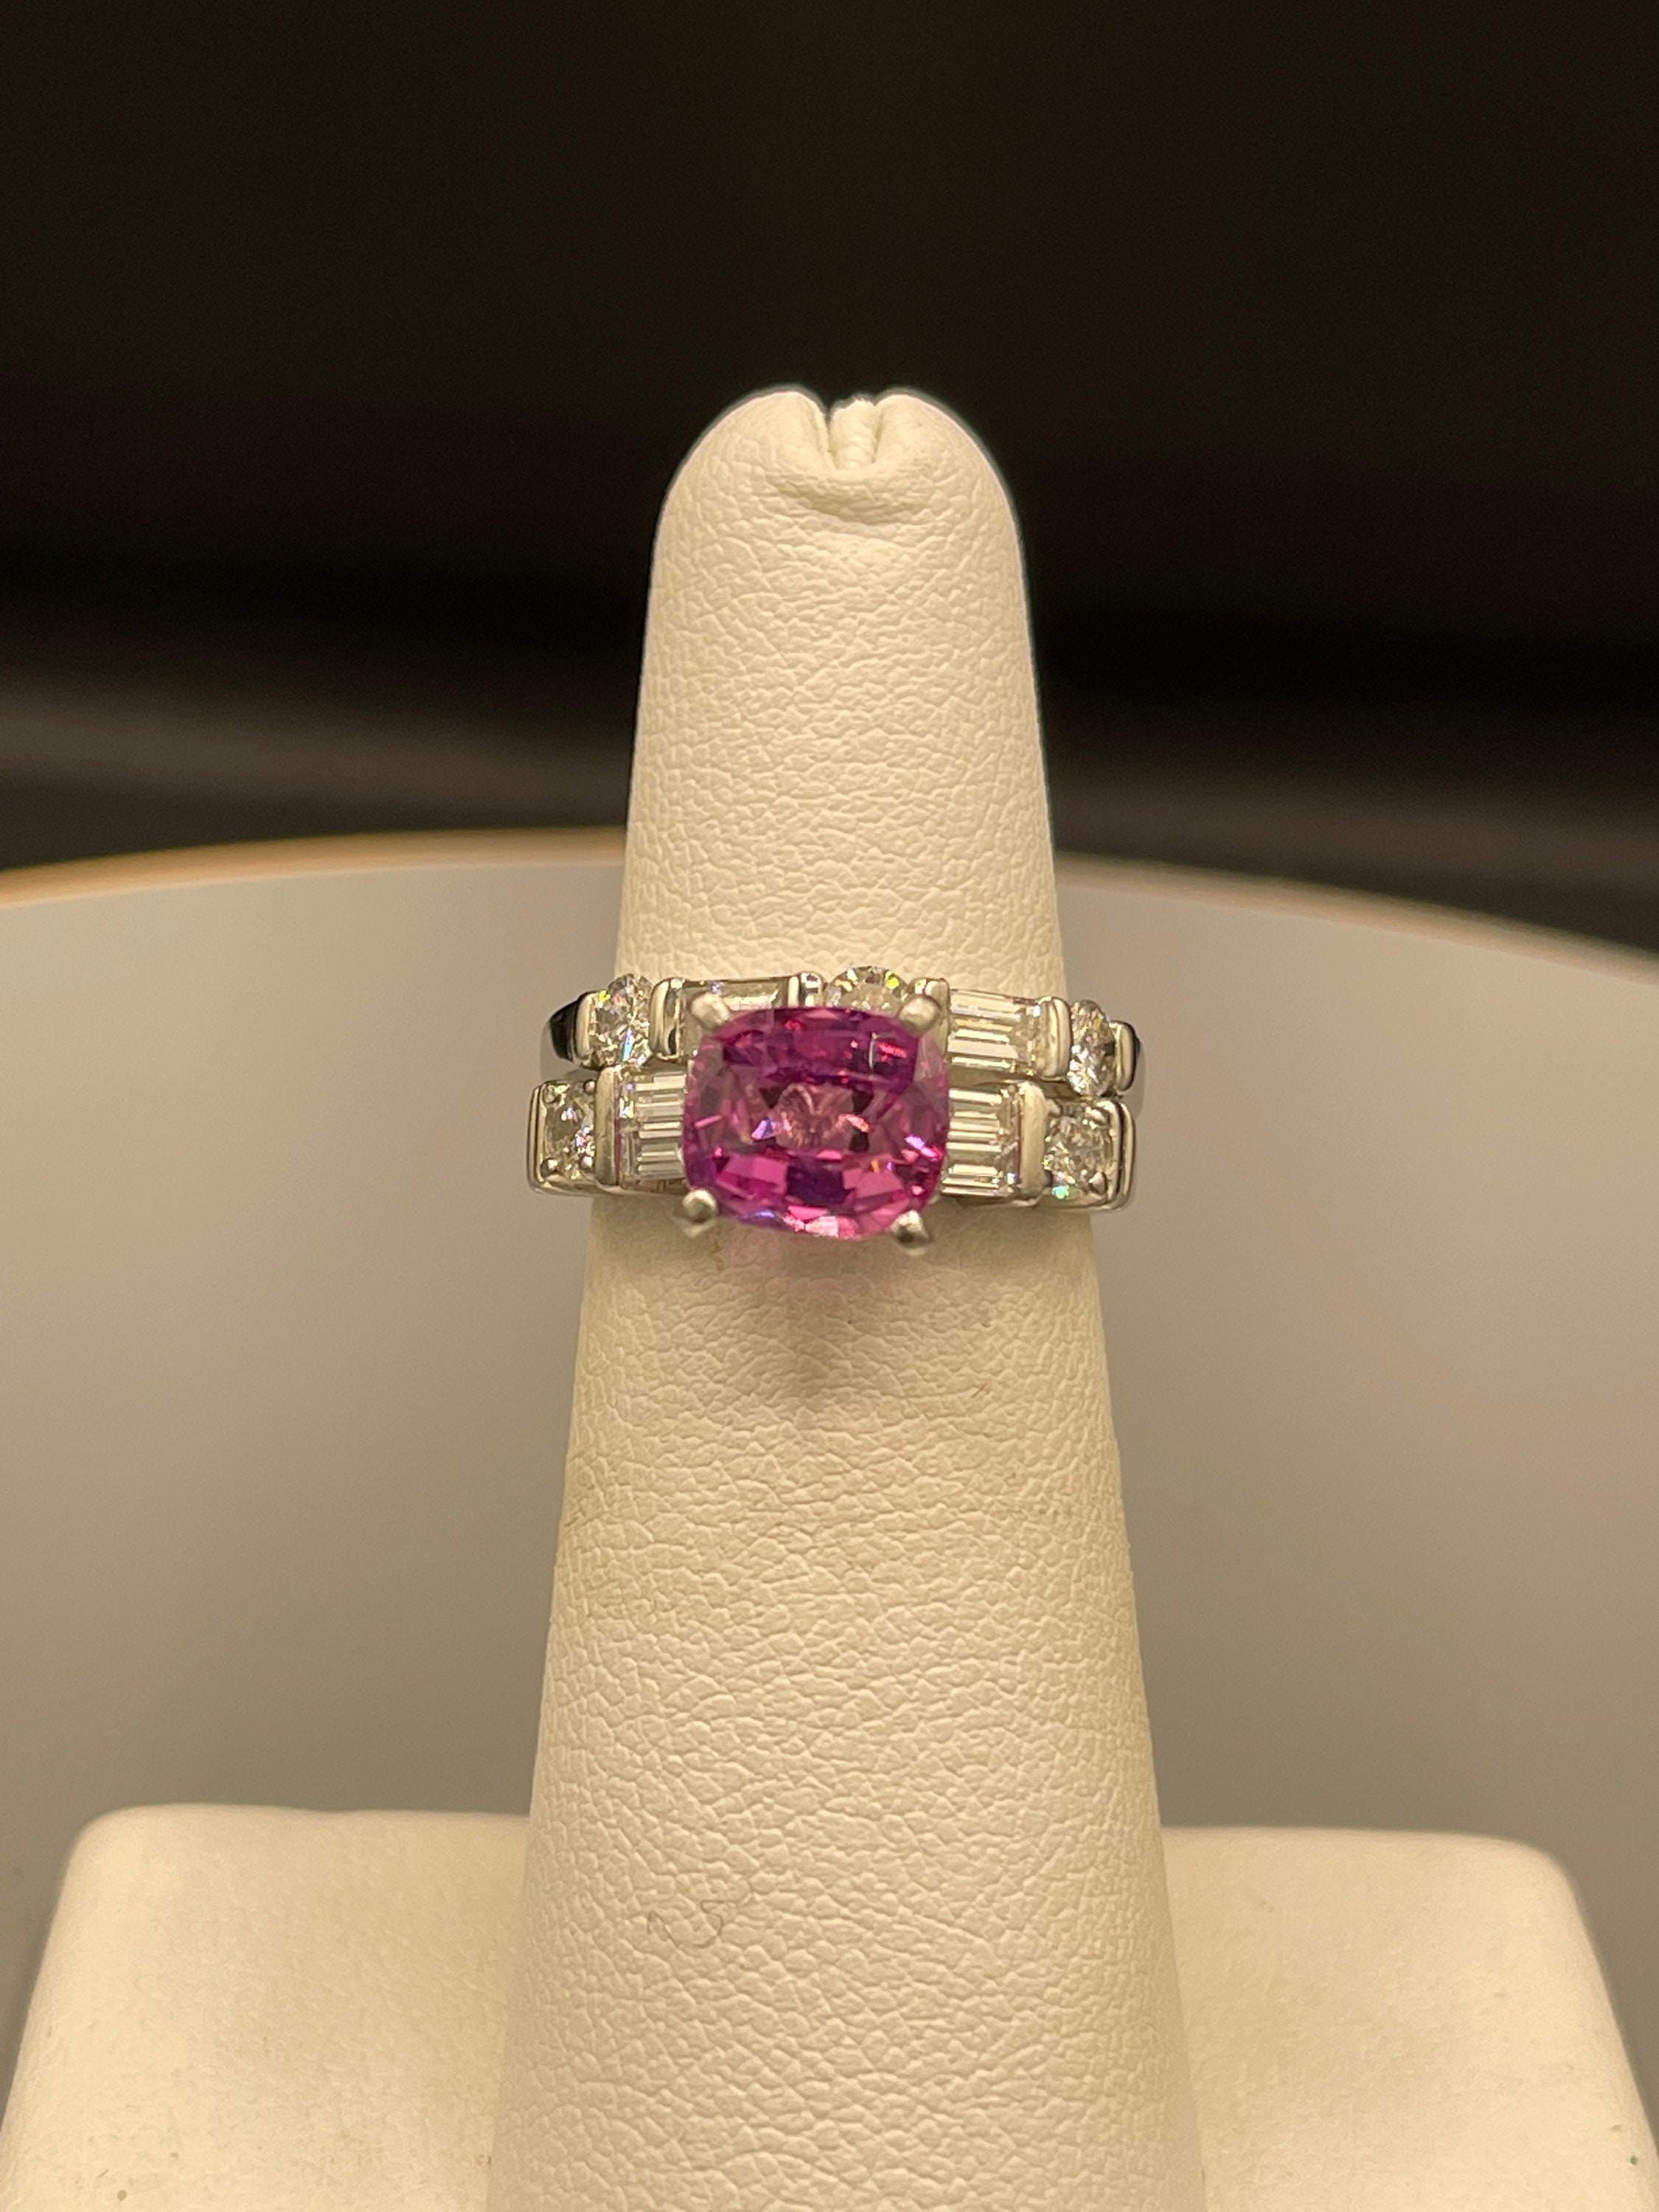 1.57 ctw Trillion Pink Sapphire and Diamond Ring in 14k rose gold